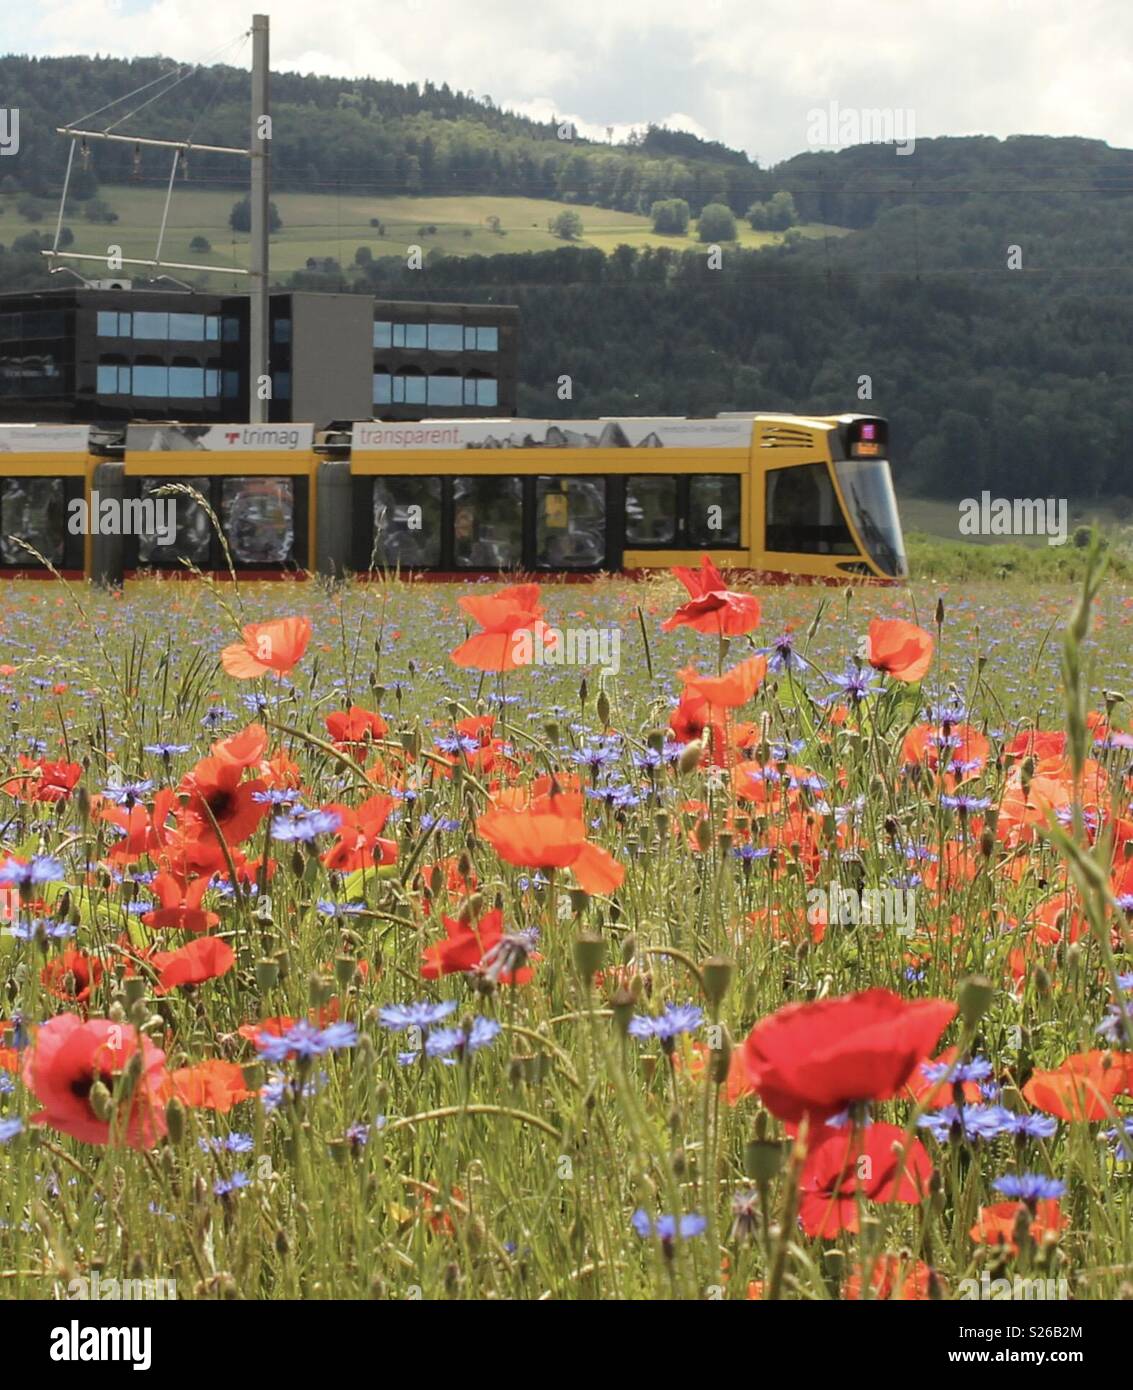 Number 11 tram heading towards Basel from Aesch with field of wildflowers in foreground Stock Photo